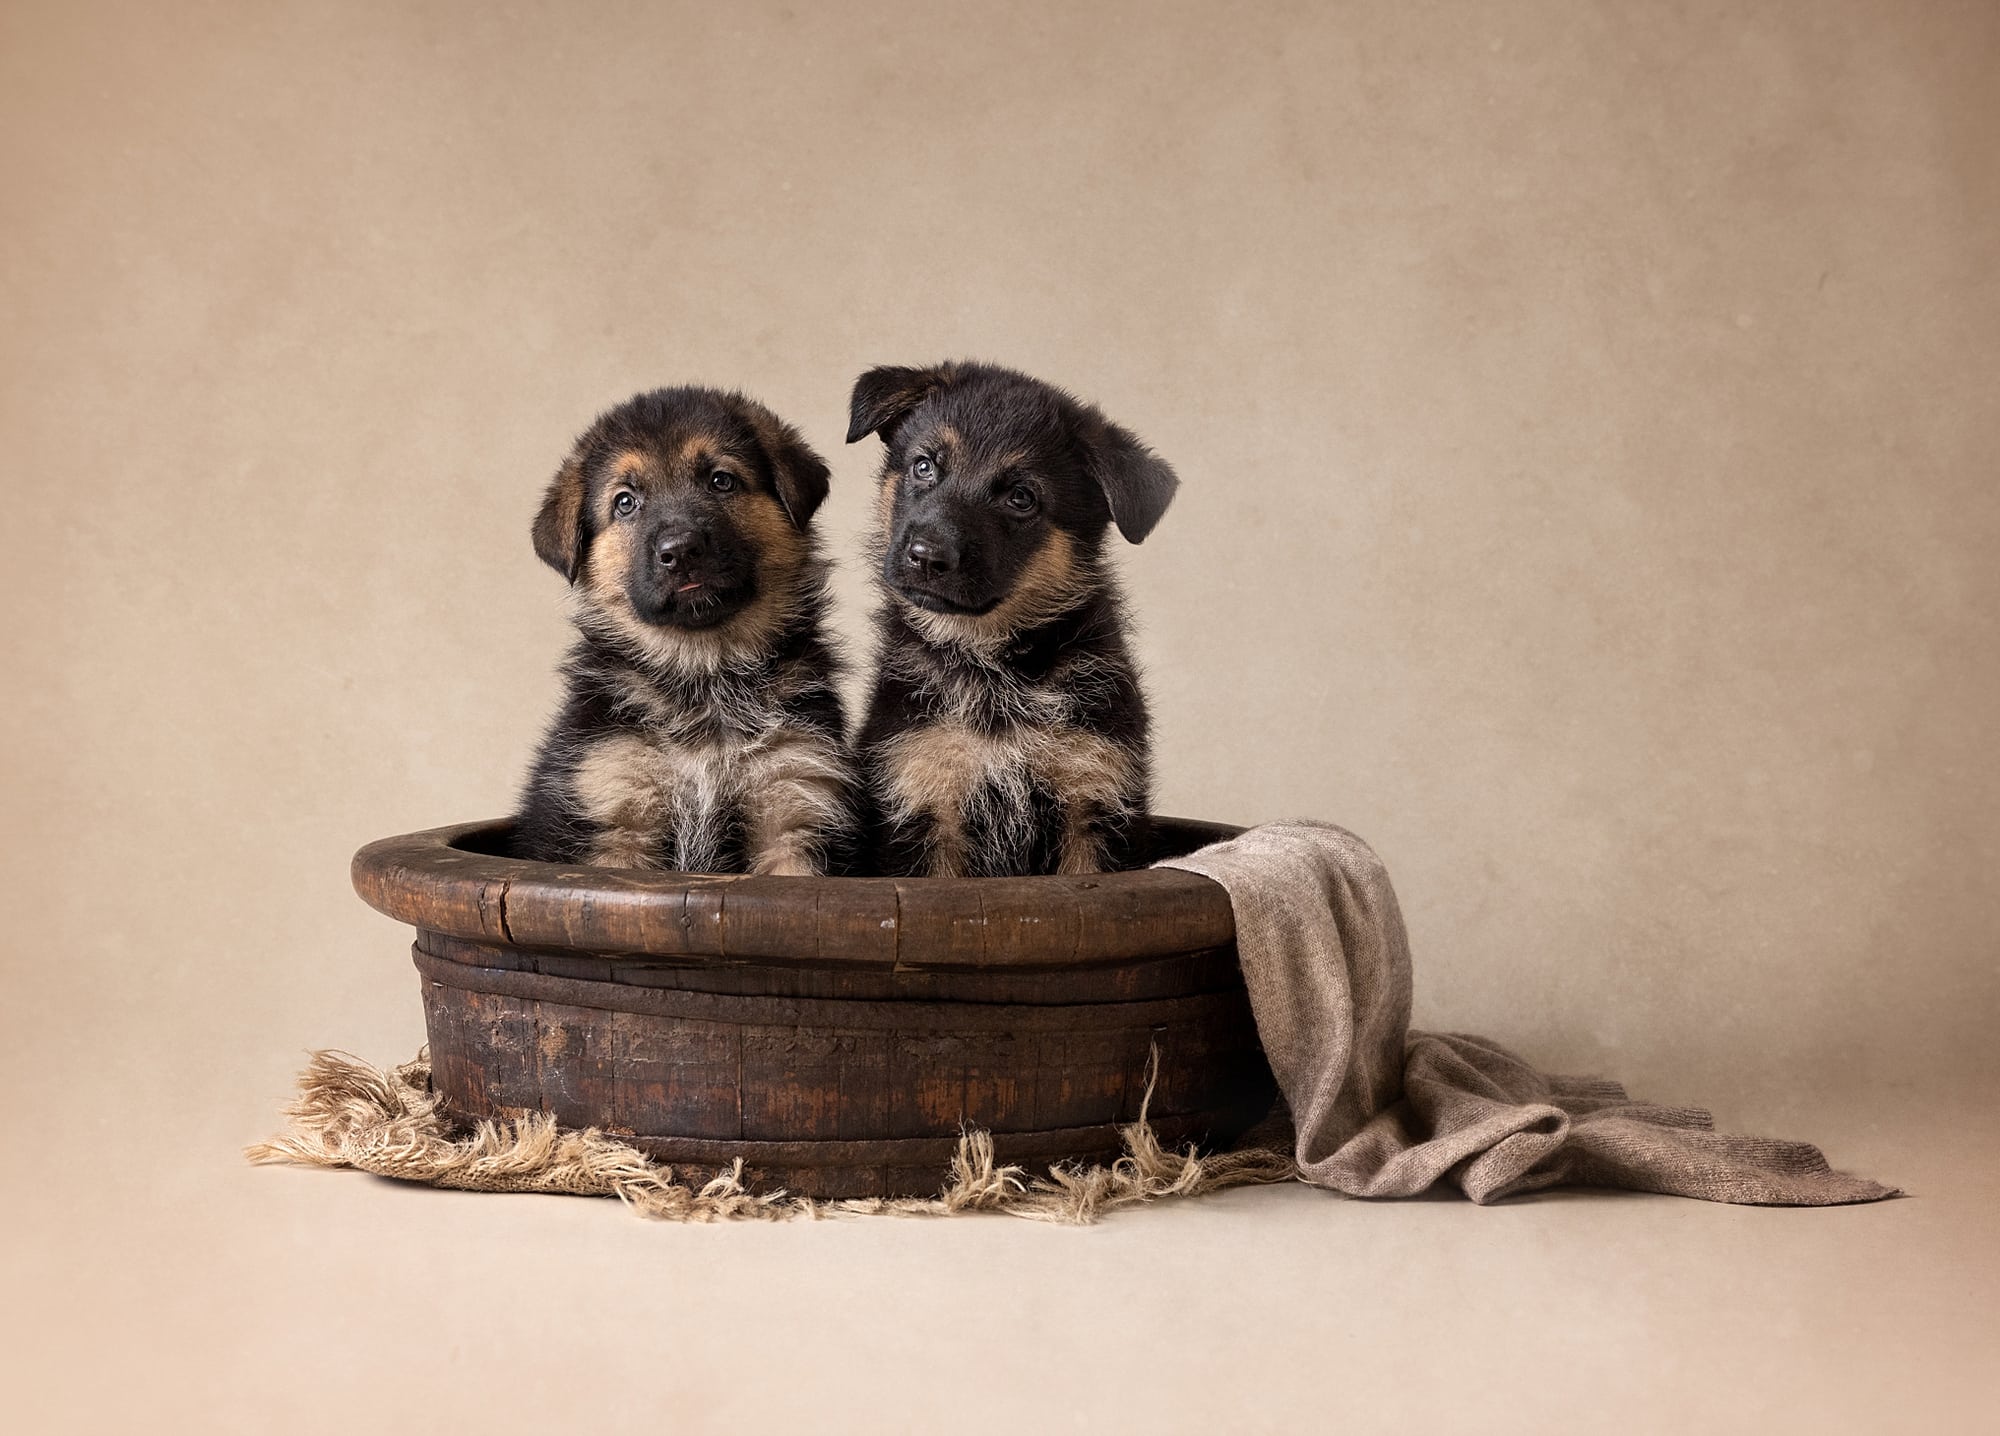 Two German Shepherd puppies in a wooden bowl during a Dog Portrait Photoshoot in Suffolk